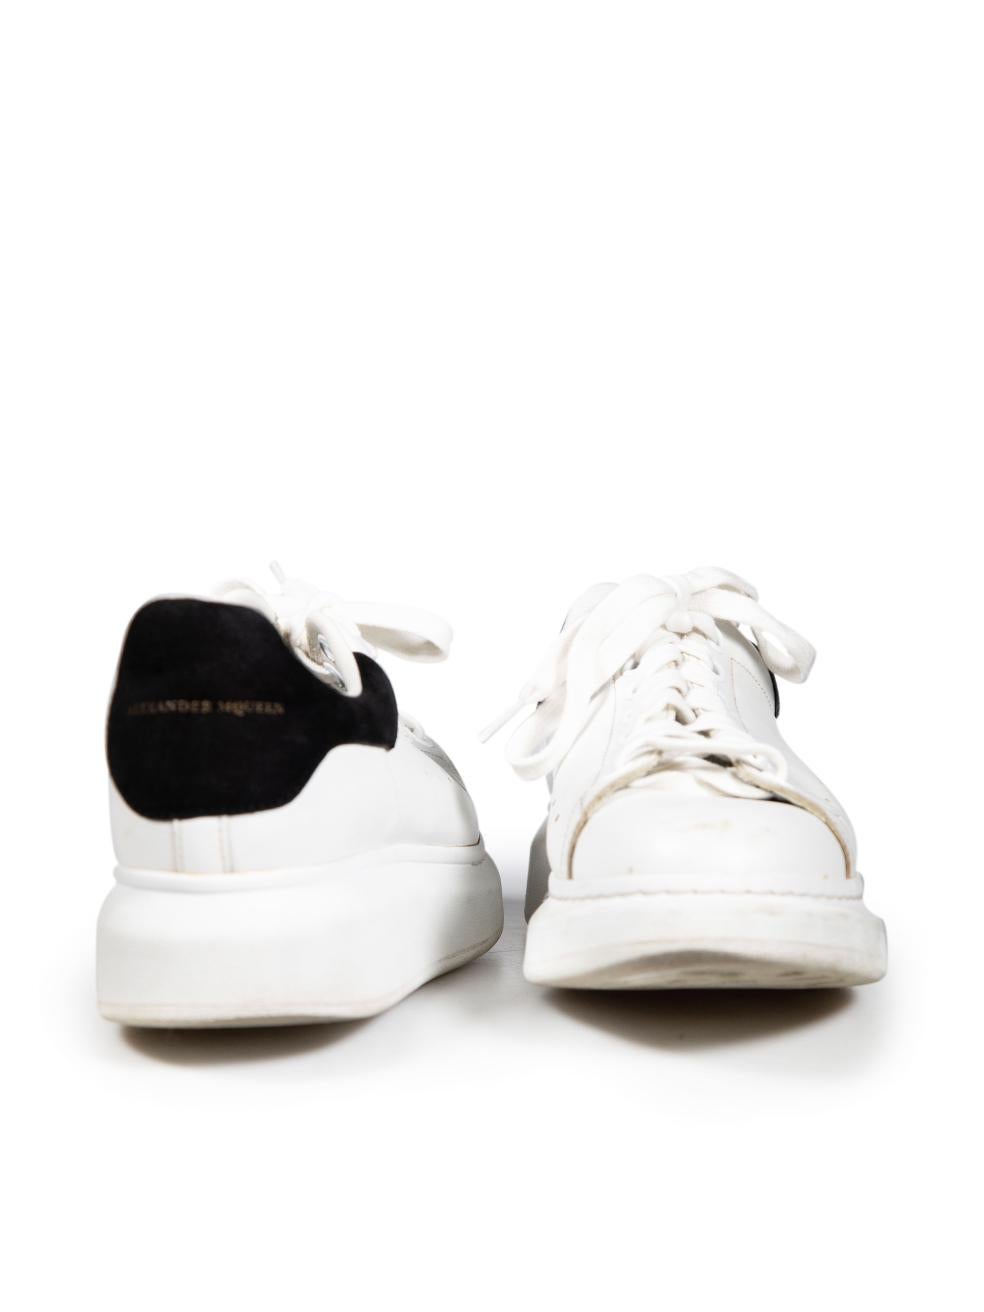 Alexander McQueen White Oversize Leather Trainers Size IT 39 In Good Condition For Sale In London, GB